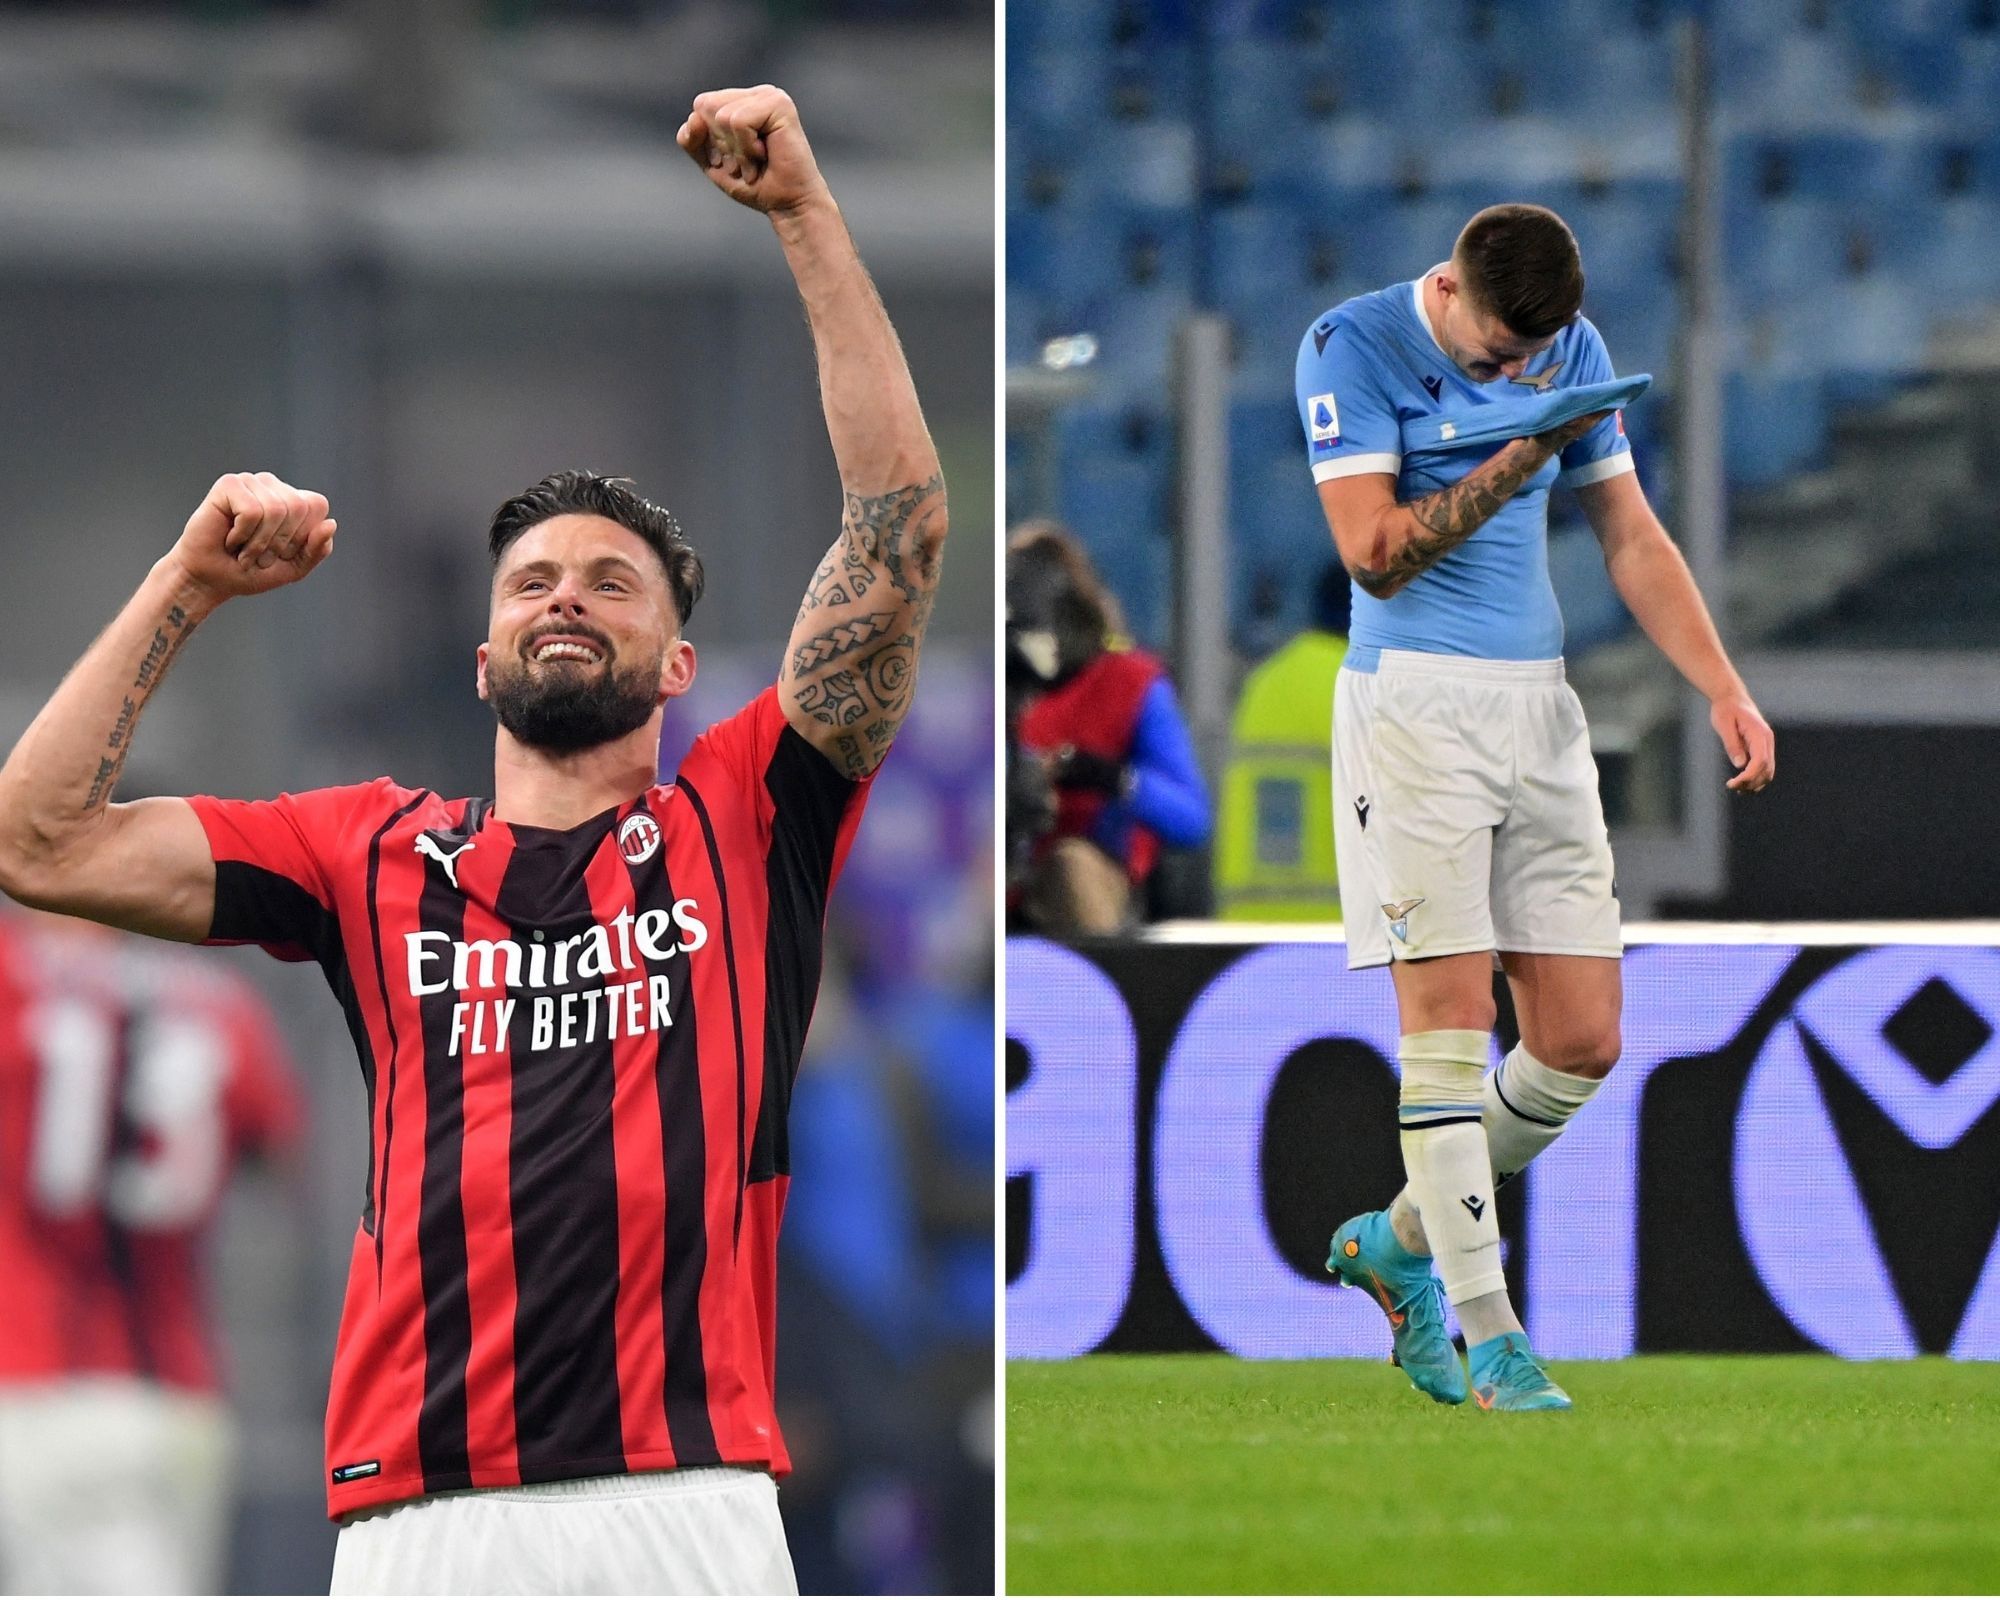 AC Milan vs Lazio Live Stream: How to Watch, Team News, Head to Head, Odds, Prediction and Everything You Need to Know | GiveMeSport